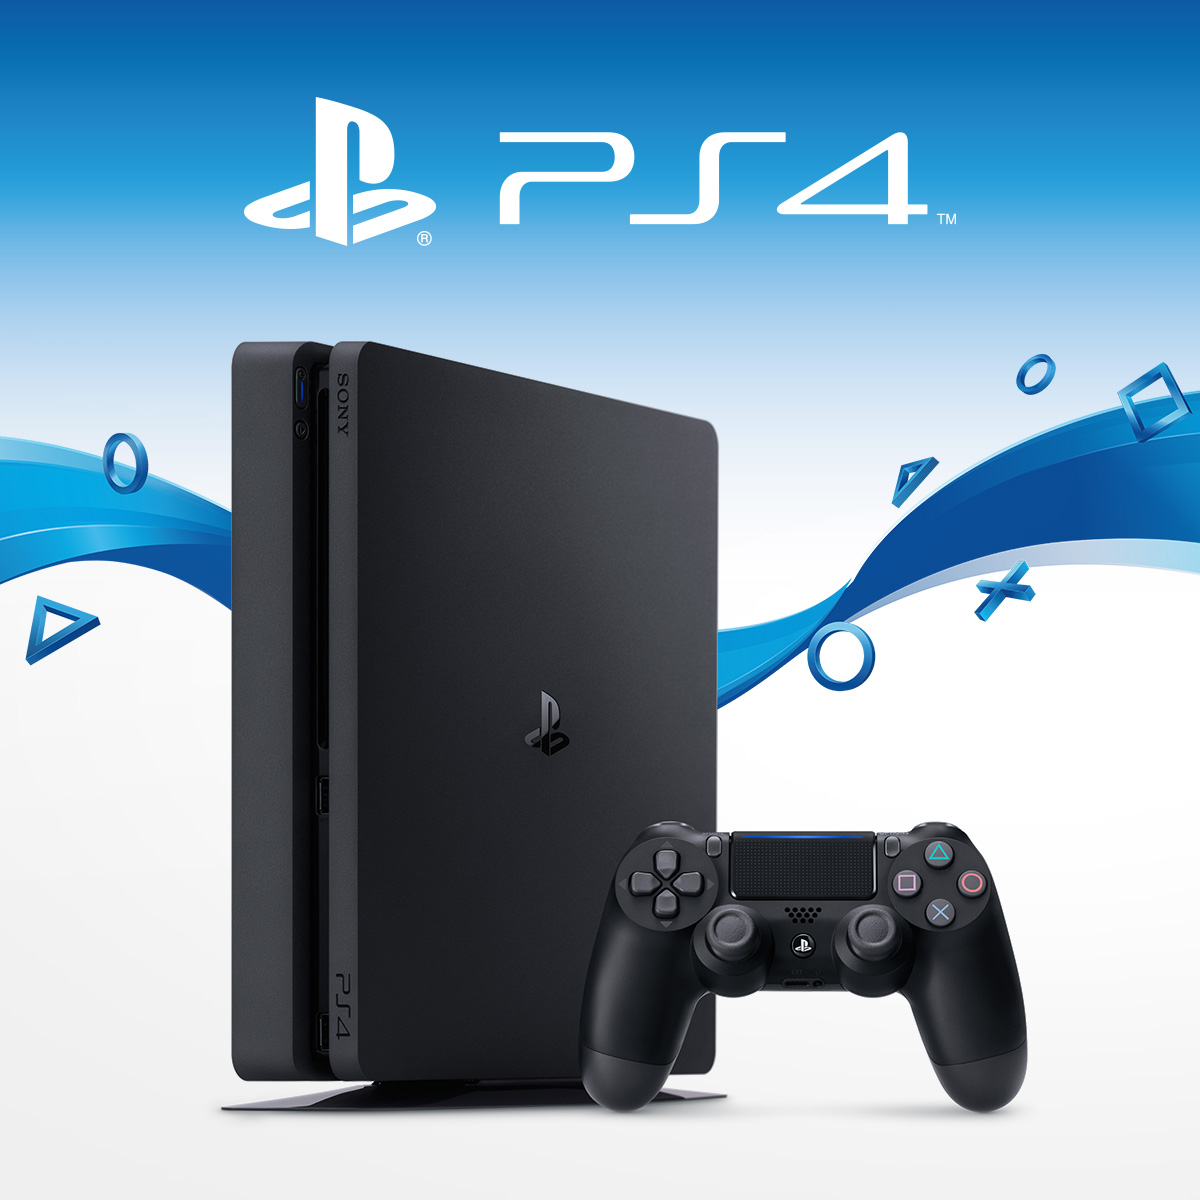 which is better ps4 500gb or 1tb